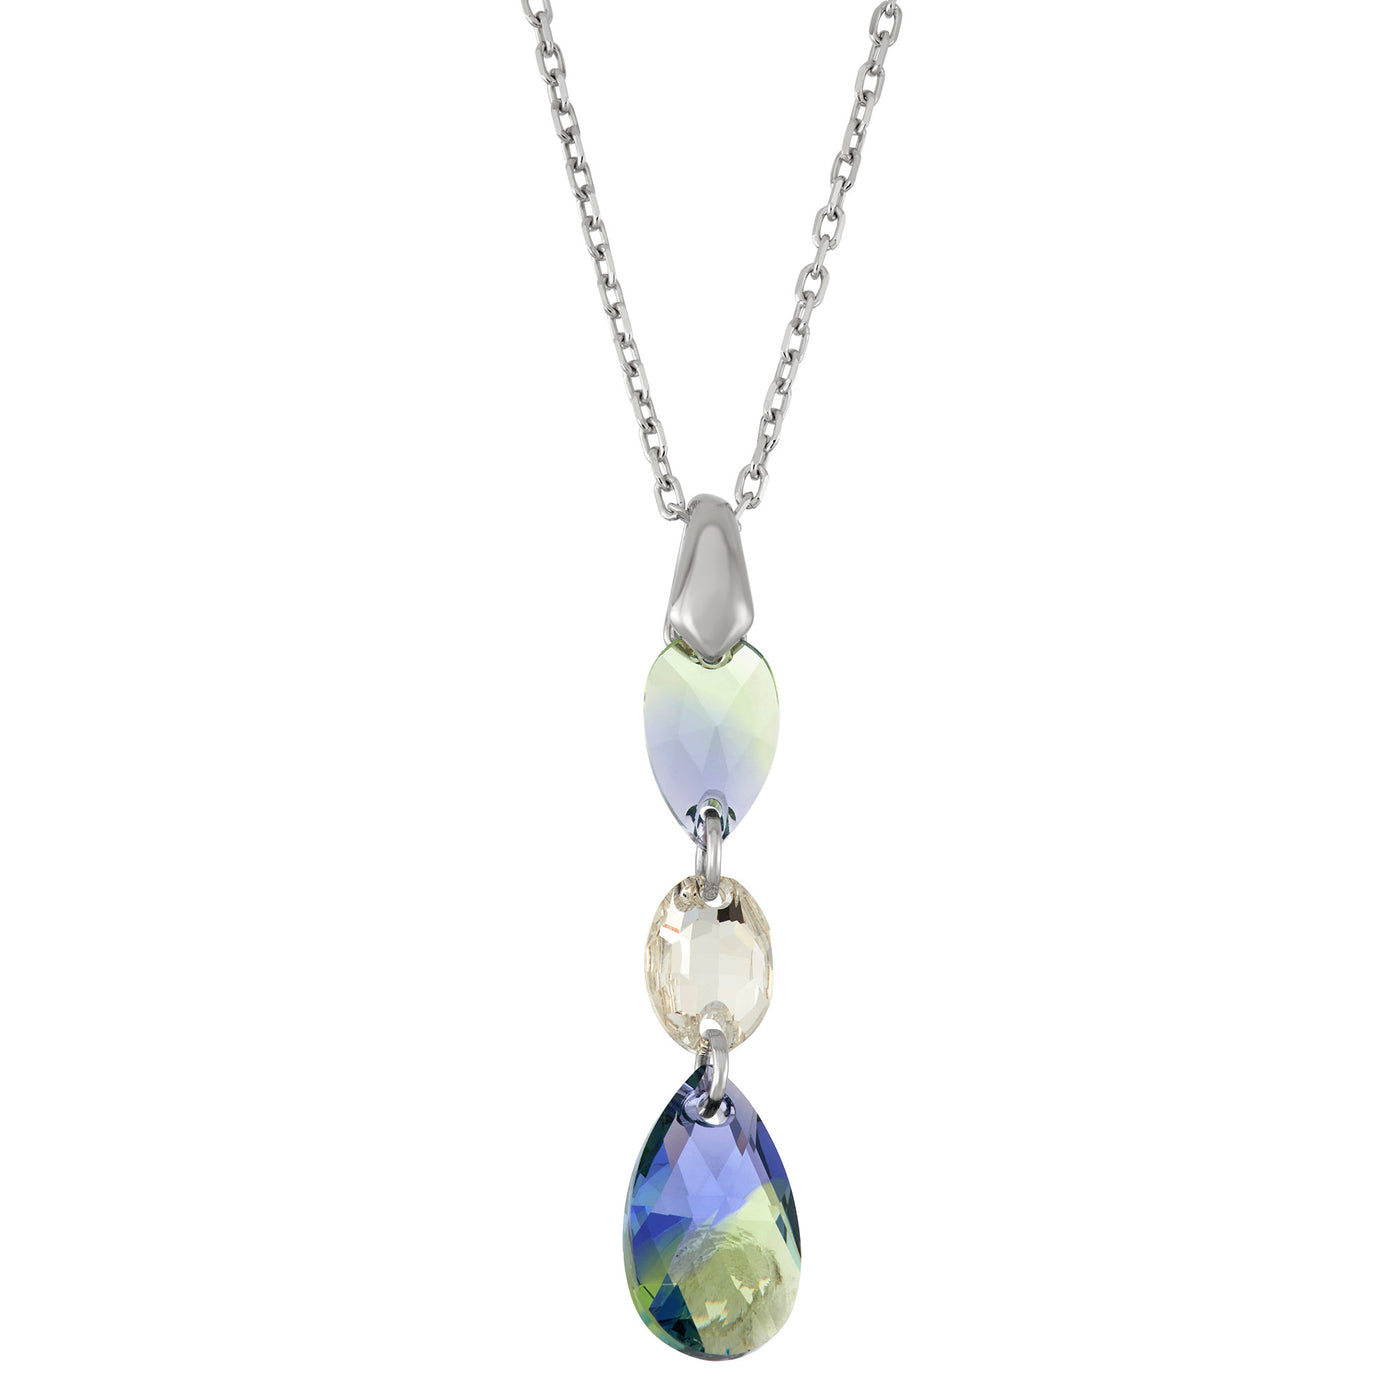 Rebecca Sloane Silver Tear Drop Oval Pendant With Green Crystal